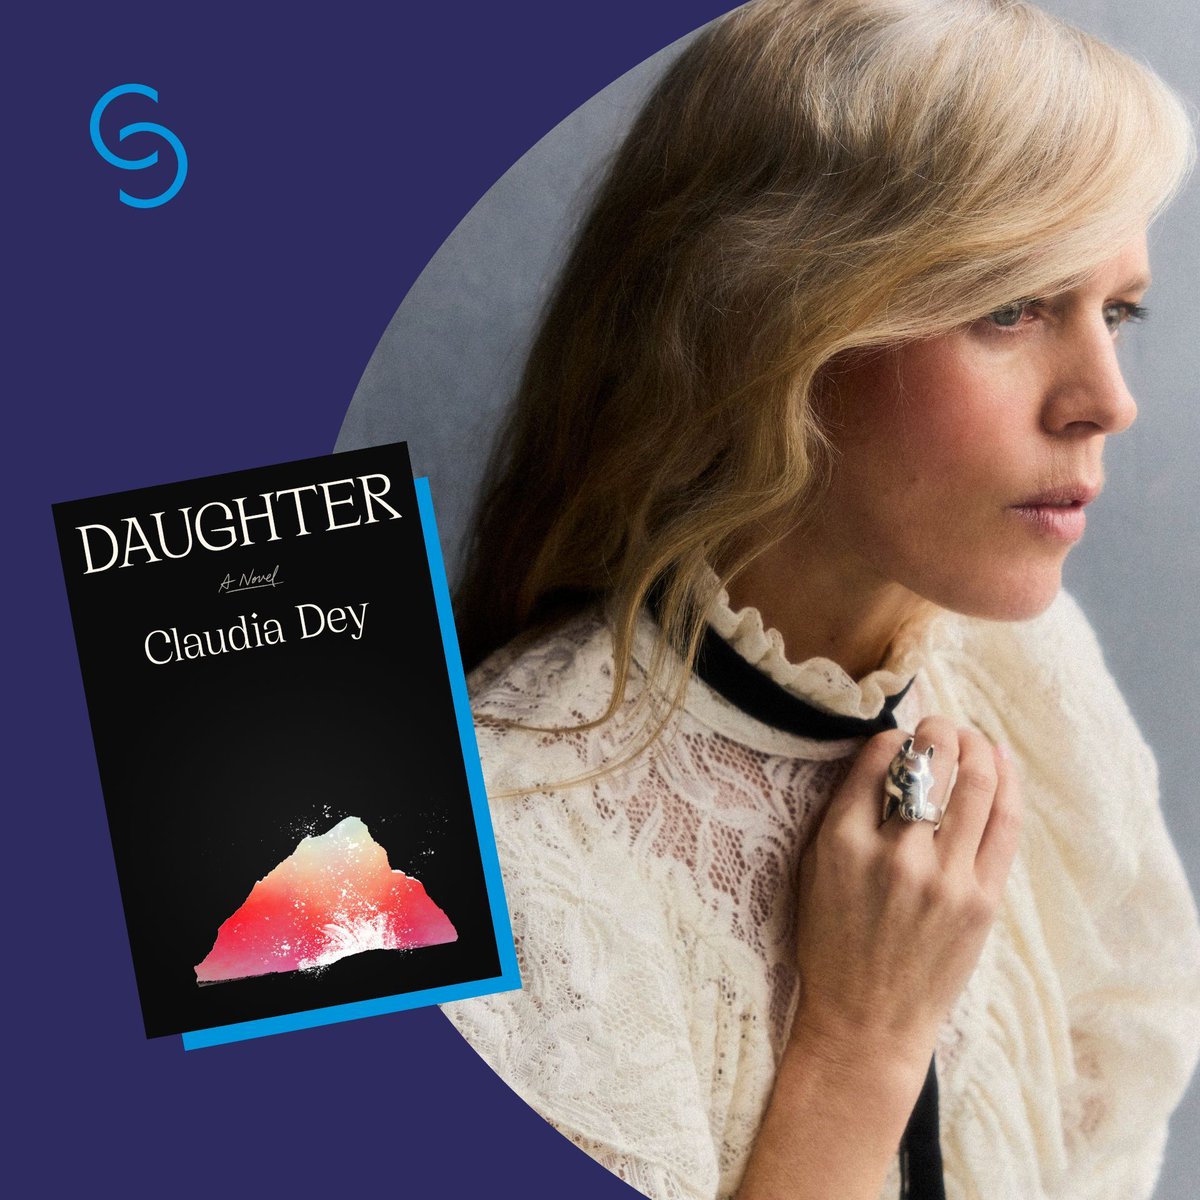 Claudia Dey’s most recent novel, Daughter, longlisted for the #ShieldsPrize, was an instant national bestseller, named a @nytimes Fall Fiction pick, an @ELLEmagazine Book of the Year, and a @globeandmail Best Book. #ClaudiaDey #DaughterNovel @doubledayca